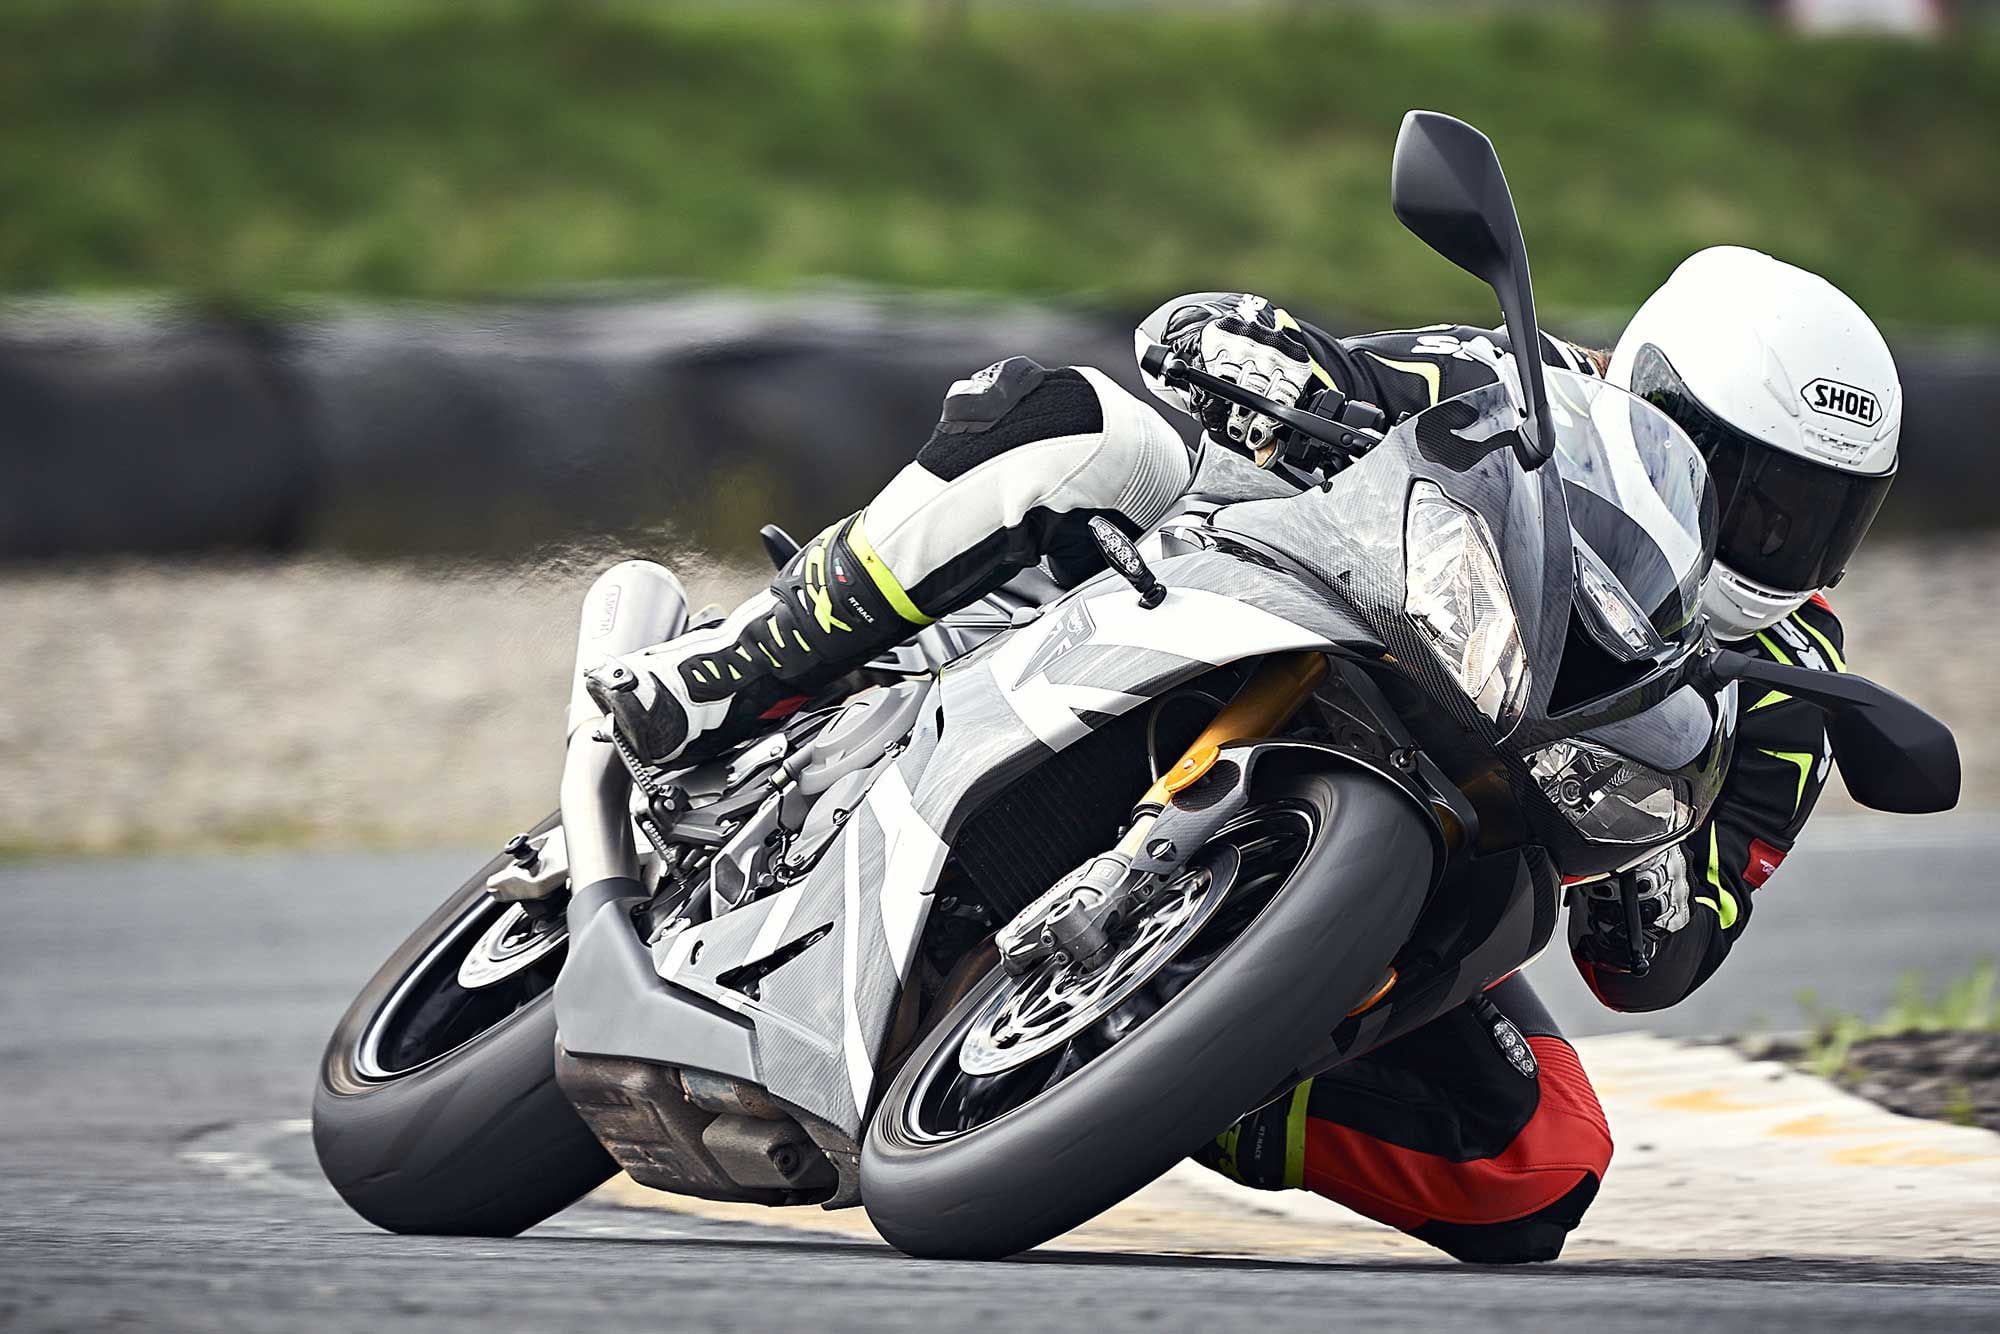 Despite the Moto2 in the name, the Daytona Moto2 765 is not a hard-edged track weapon. It is, however, a wonderful continuation of Triumph’s supersport line.